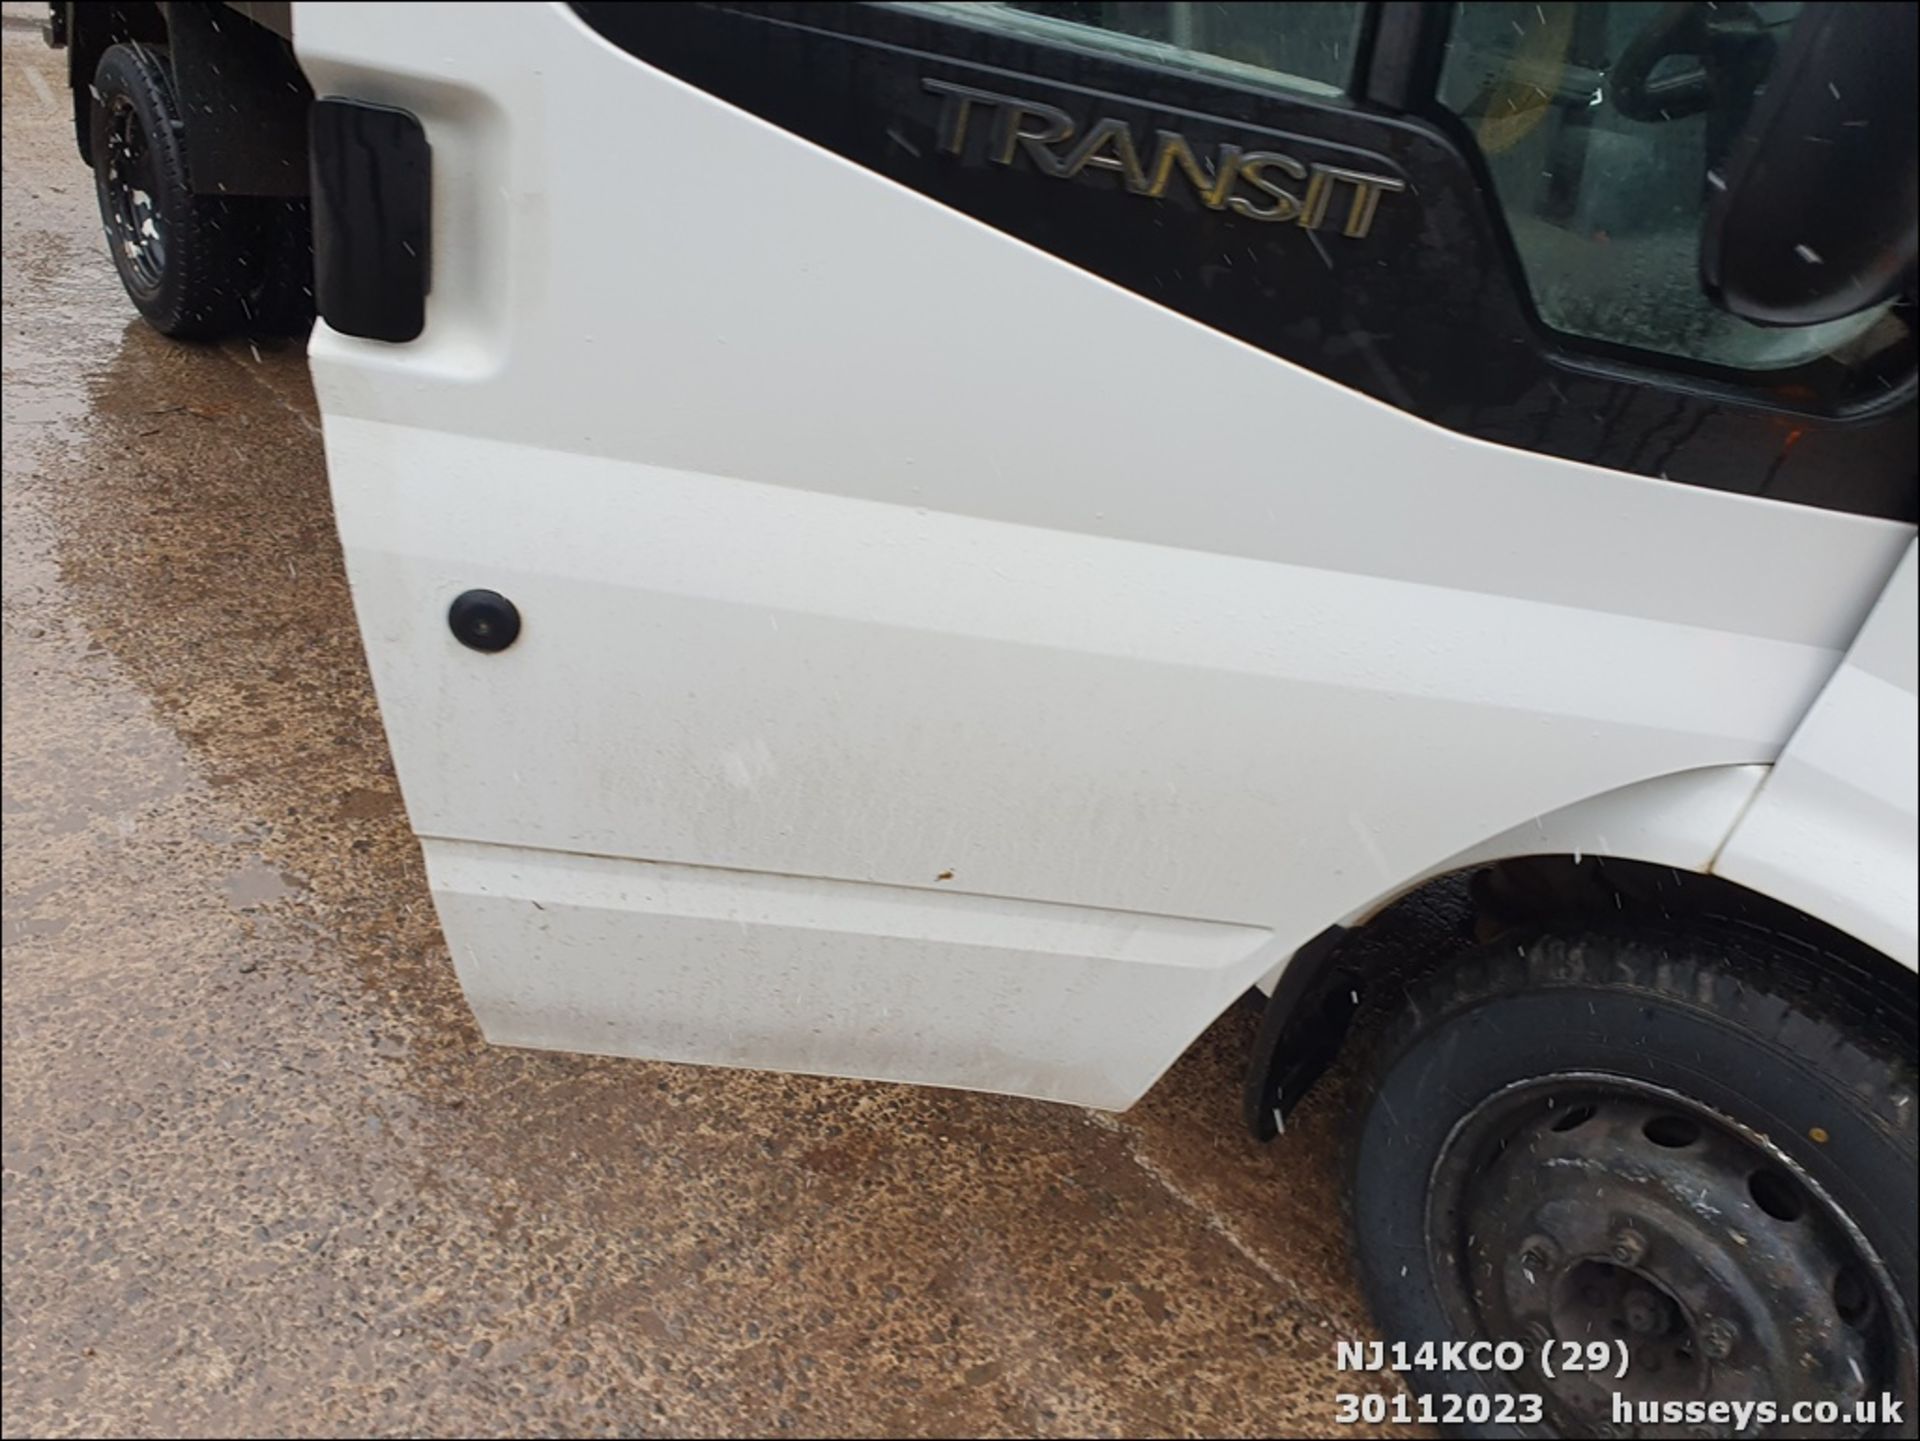 14/14 FORD TRANSIT 100 T350 RWD - 2198cc 4dr Tipper (White, 75k) - Image 30 of 51